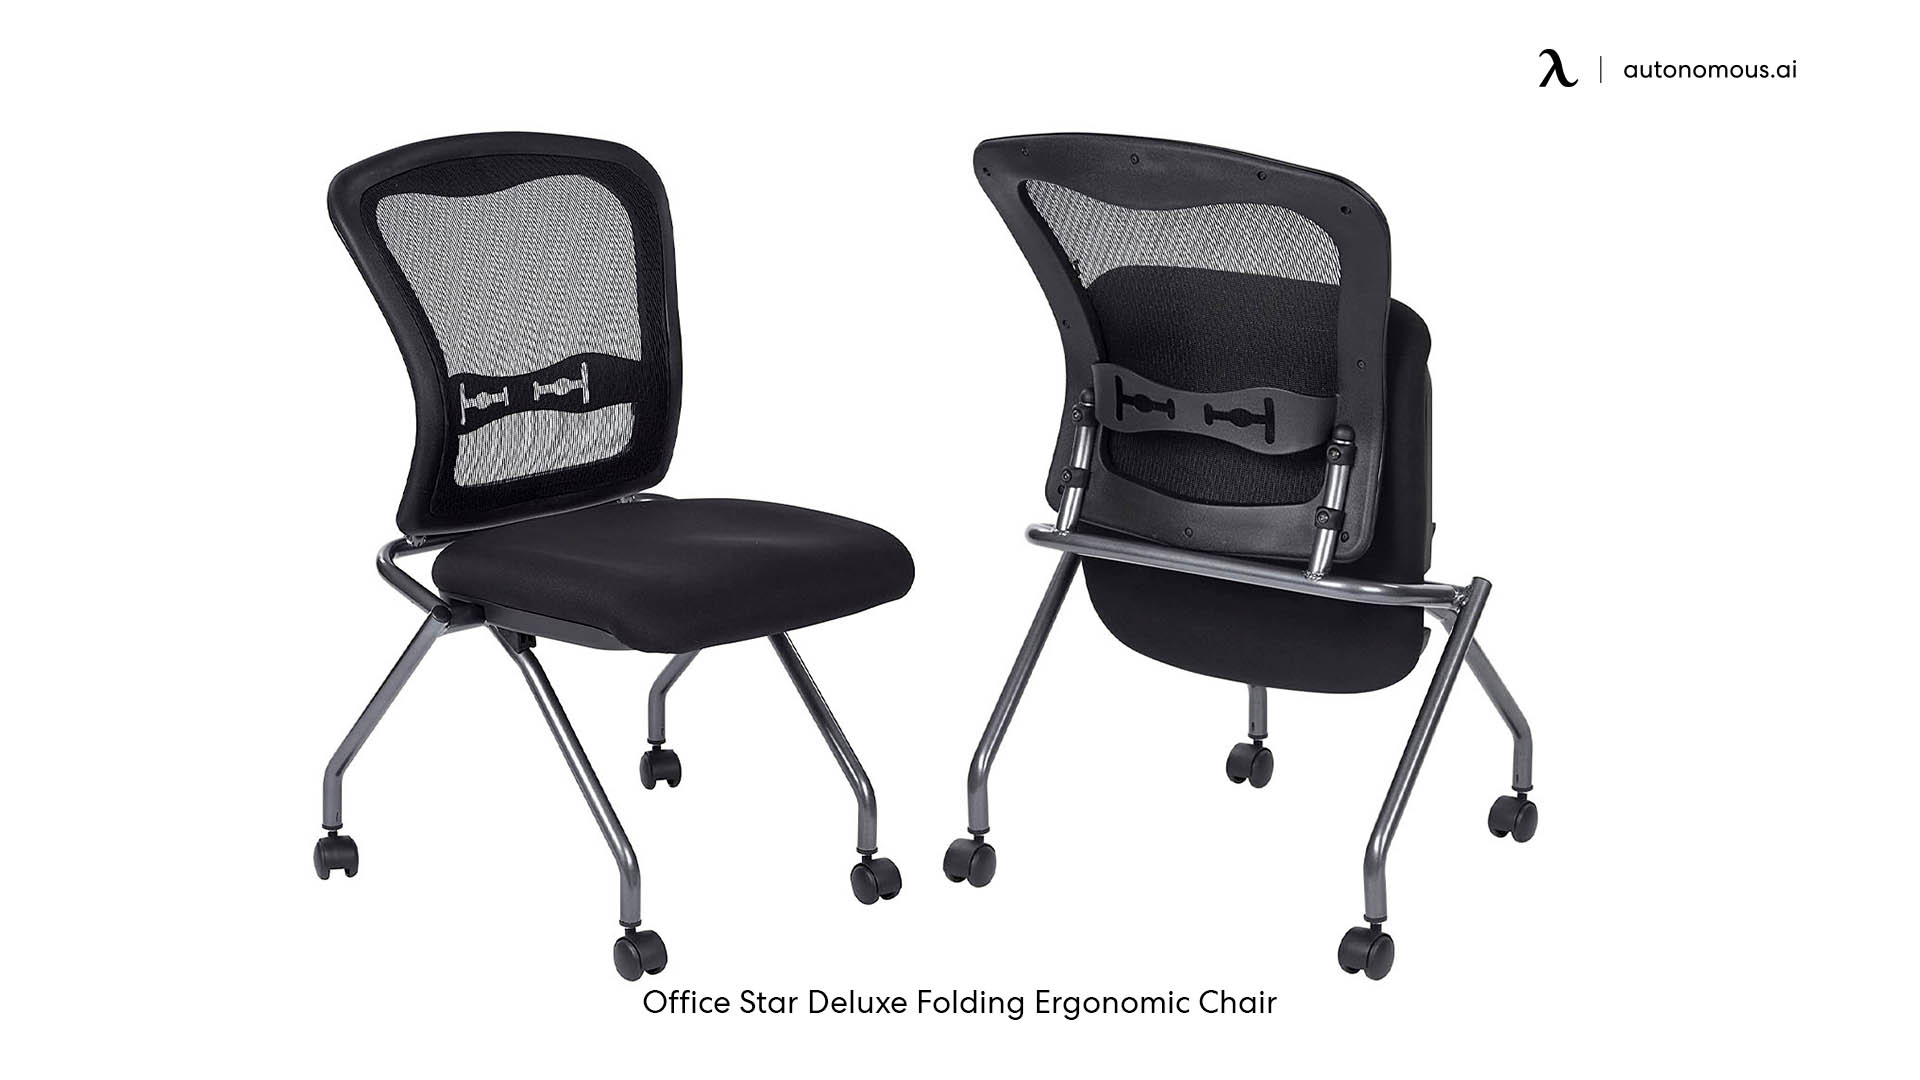 Office Star Deluxe Chair for employee